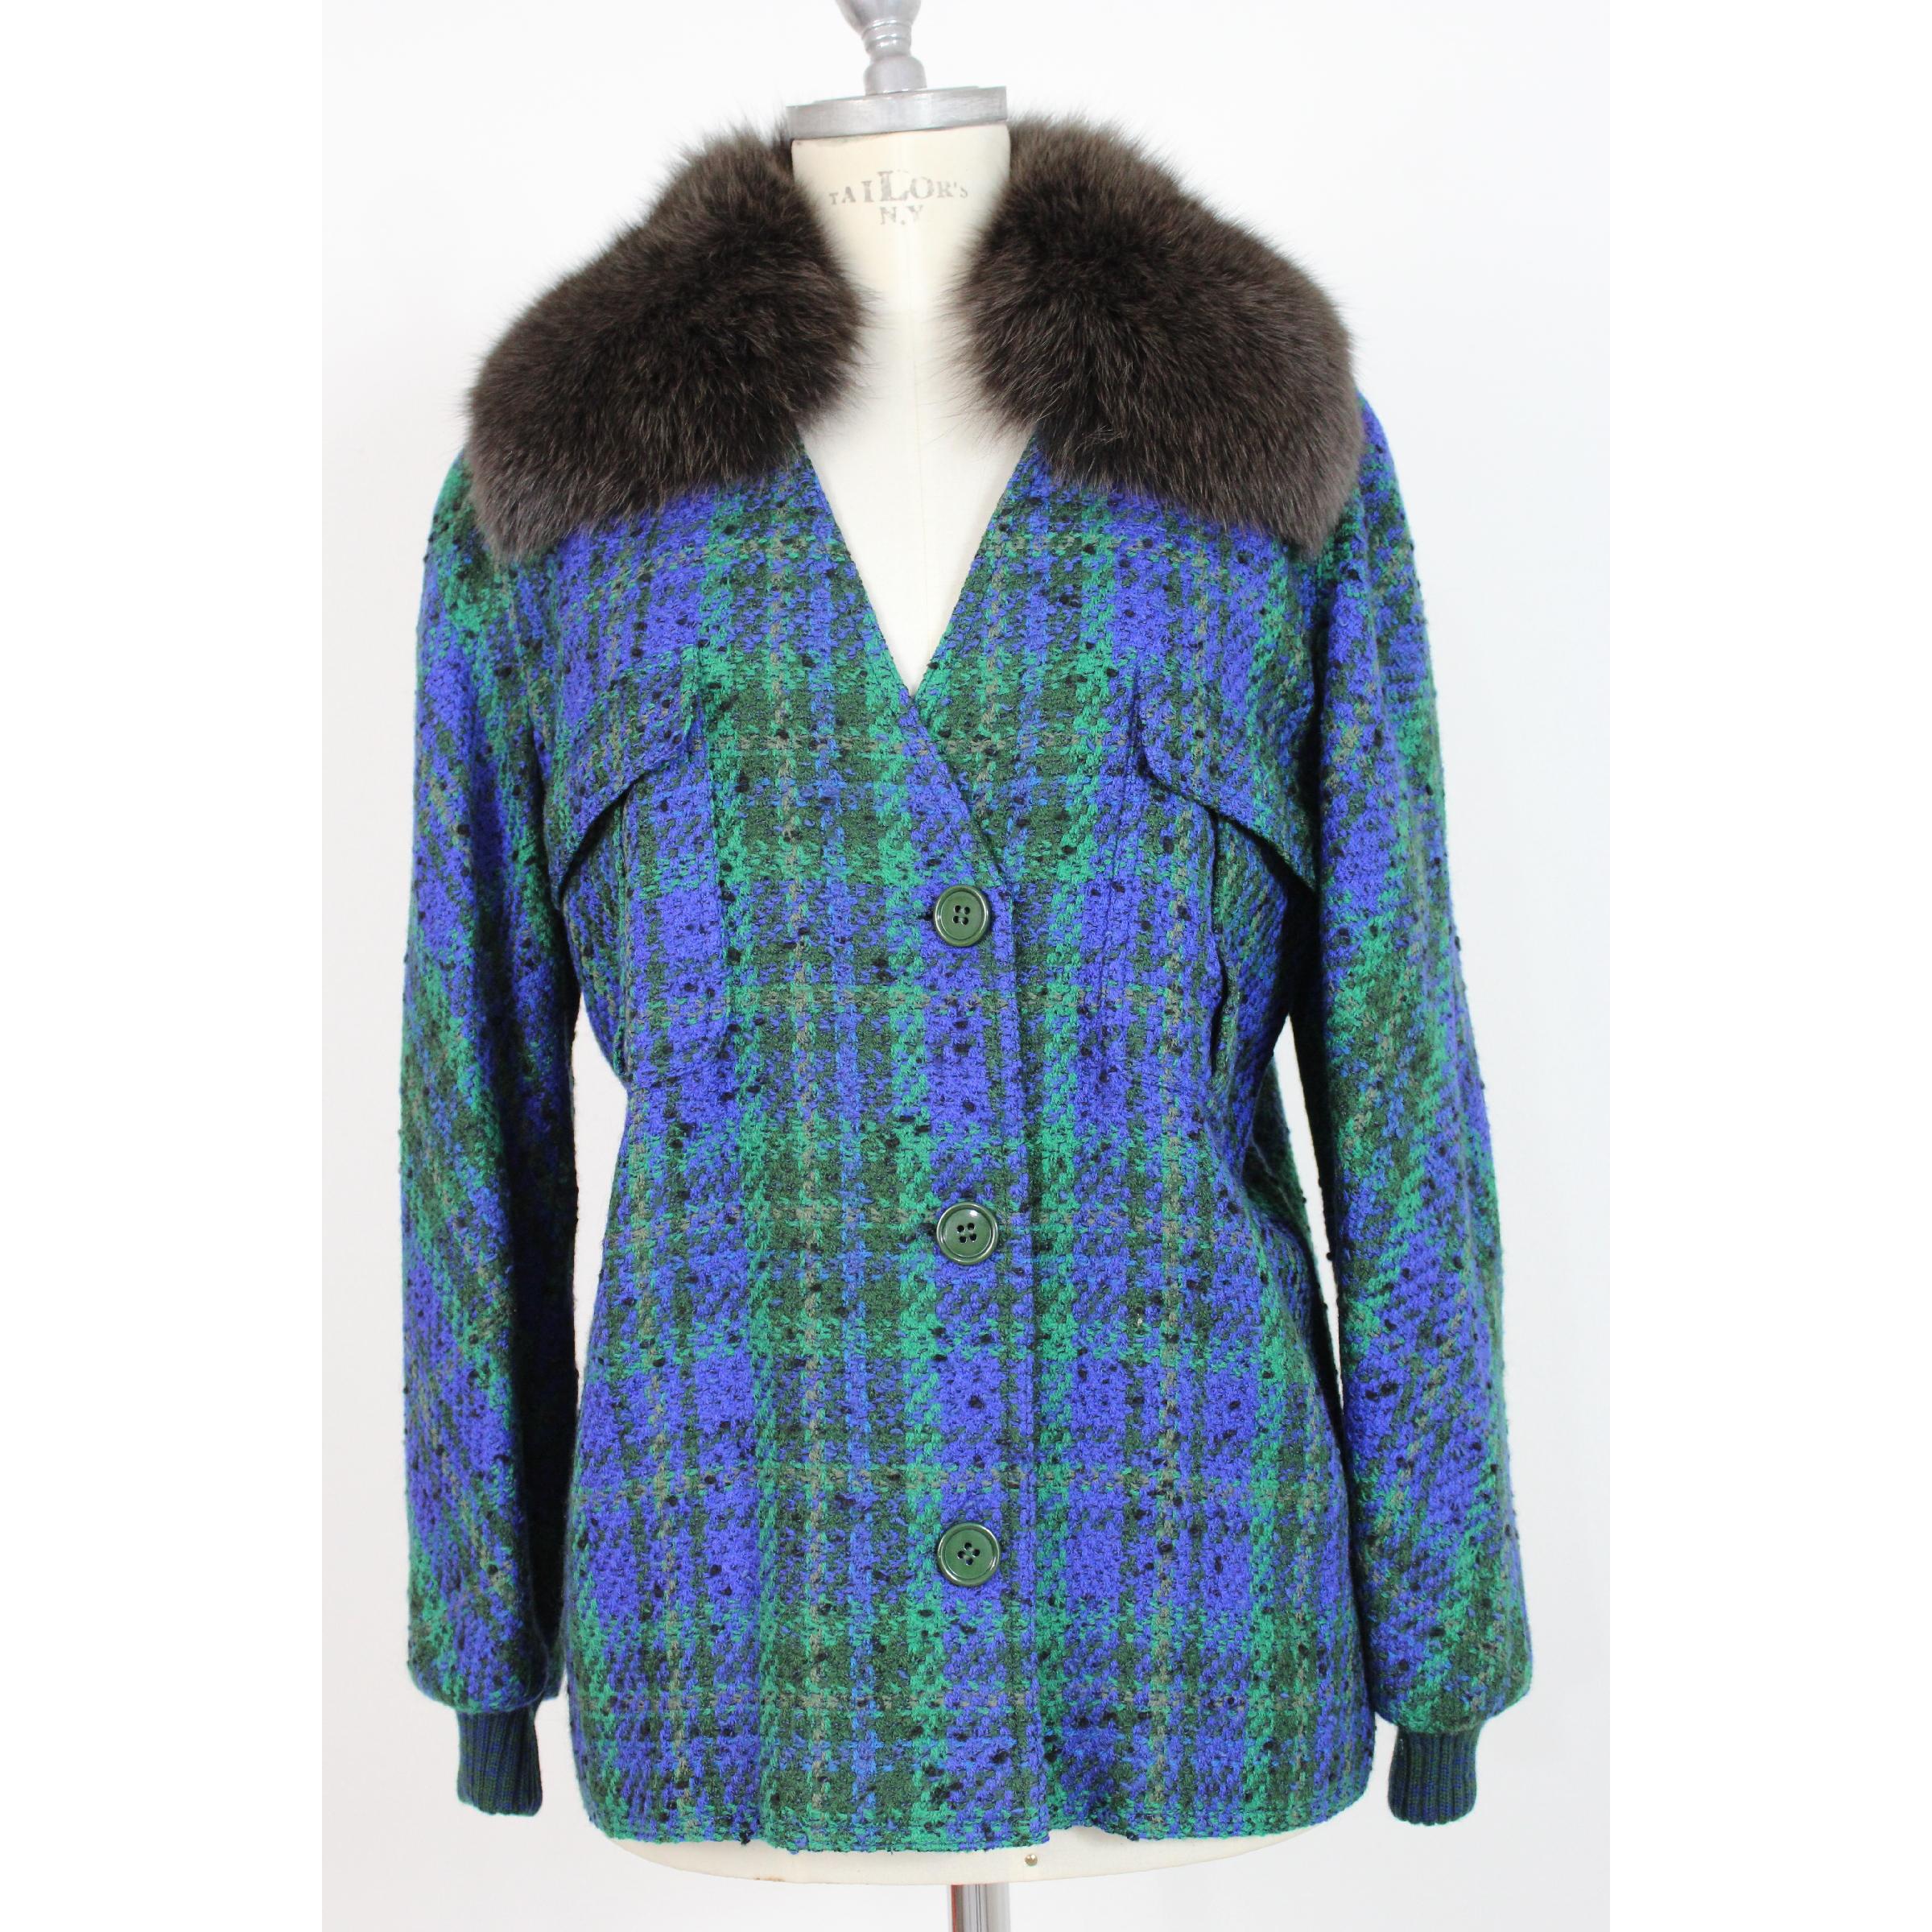 Vintage jacket for women Valentino Miss V, 1980s. Blue and green color in boucle wool. 98% wool 2% polyamide. Neck in faux fur. Wrists in wool sweater type. Made in Italy. Excellent vintage conditions.

Size: 48 It 14 Us 16 Uk

Shoulder: 48 cm
Bust